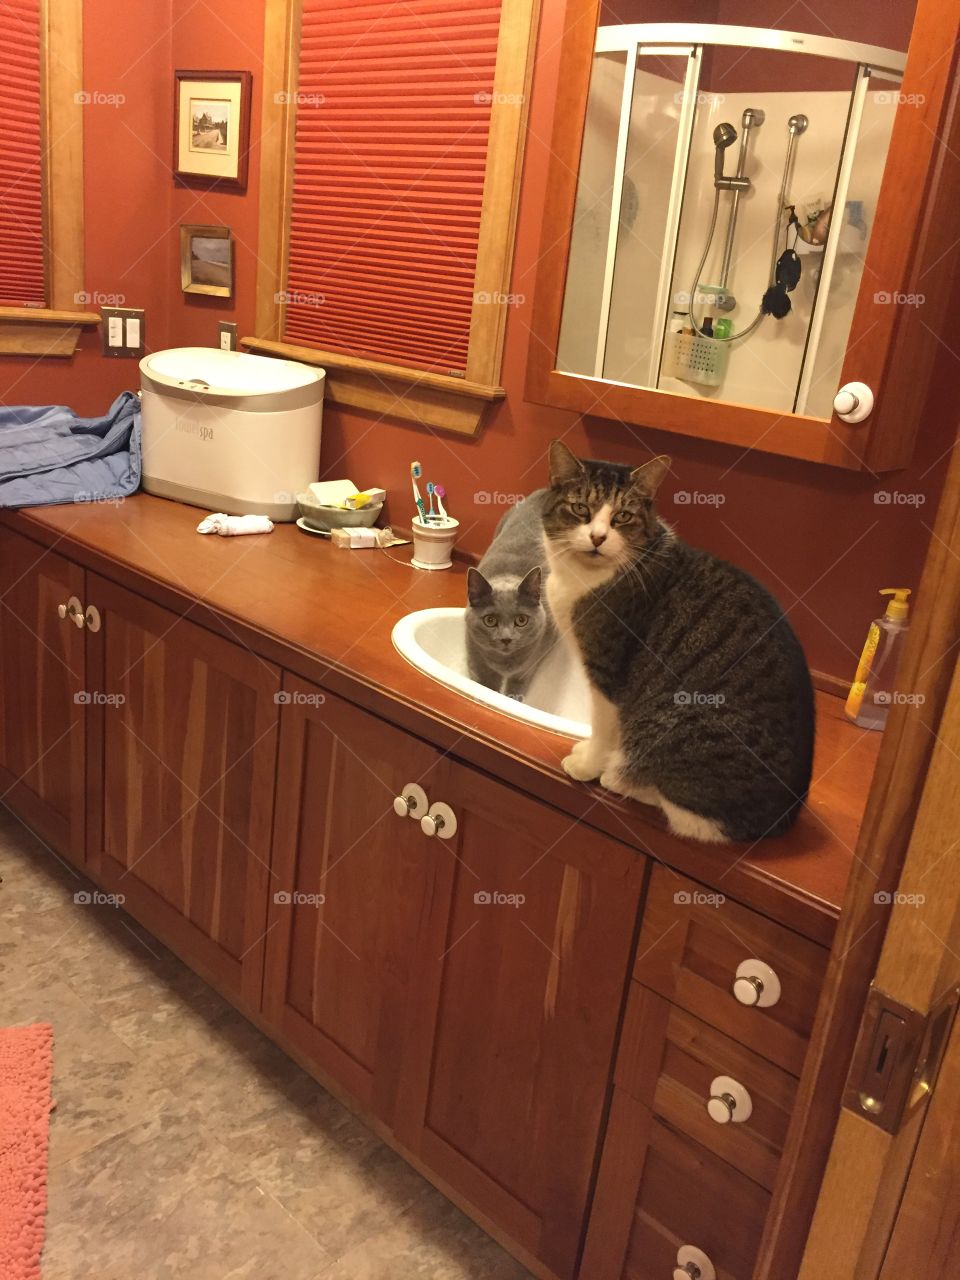 Cats in sink